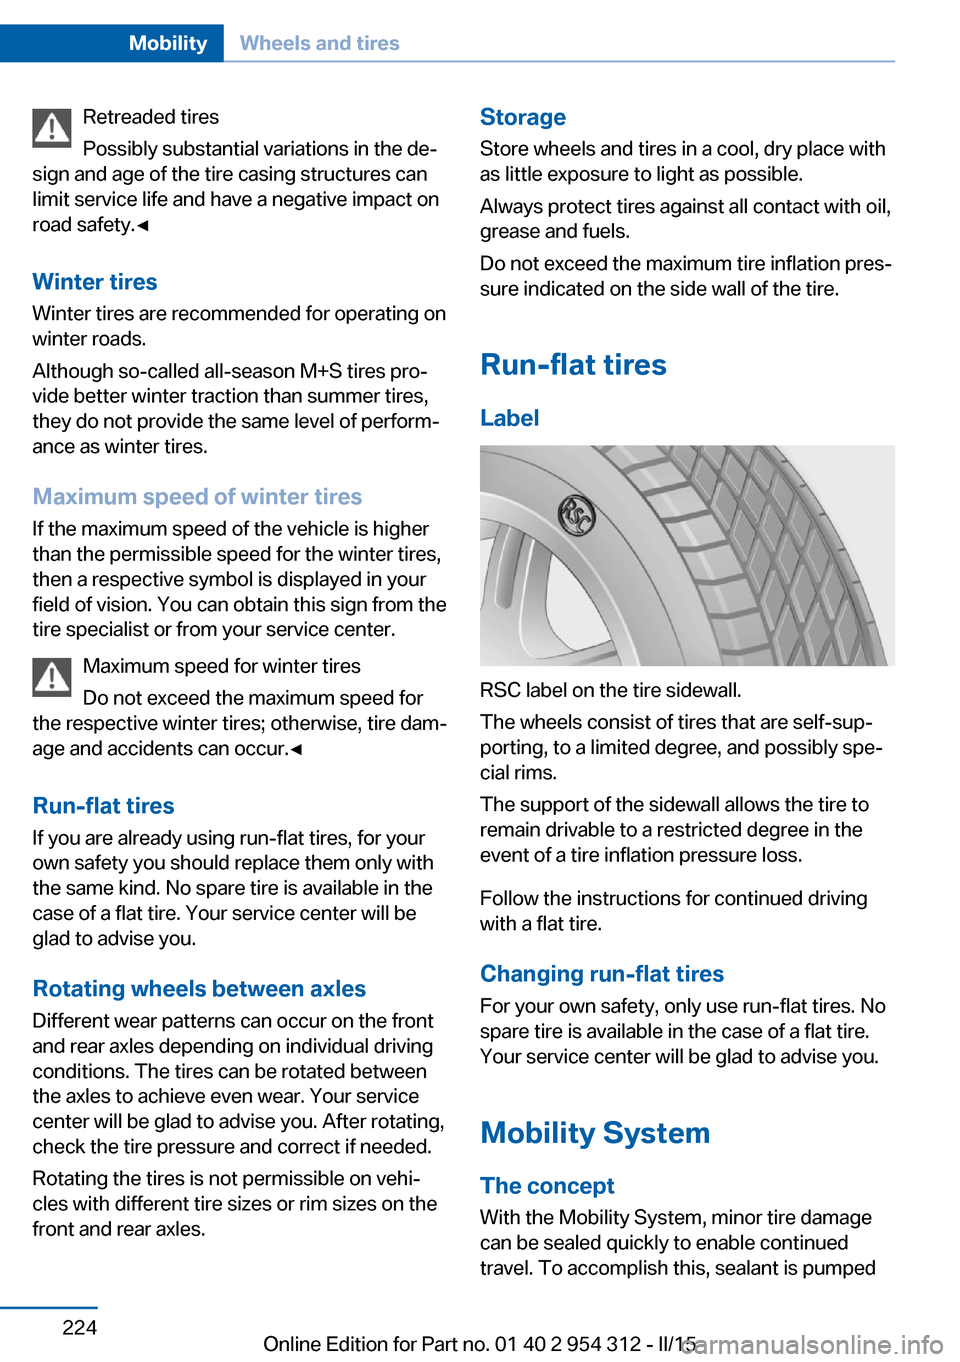 BMW 5 SERIES SEDAN 2016 F70 Owners Guide Retreaded tires
Possibly substantial variations in the de‐
sign and age of the tire casing structures can
limit service life and have a negative impact on
road safety.◀
Winter tires
Winter tires a